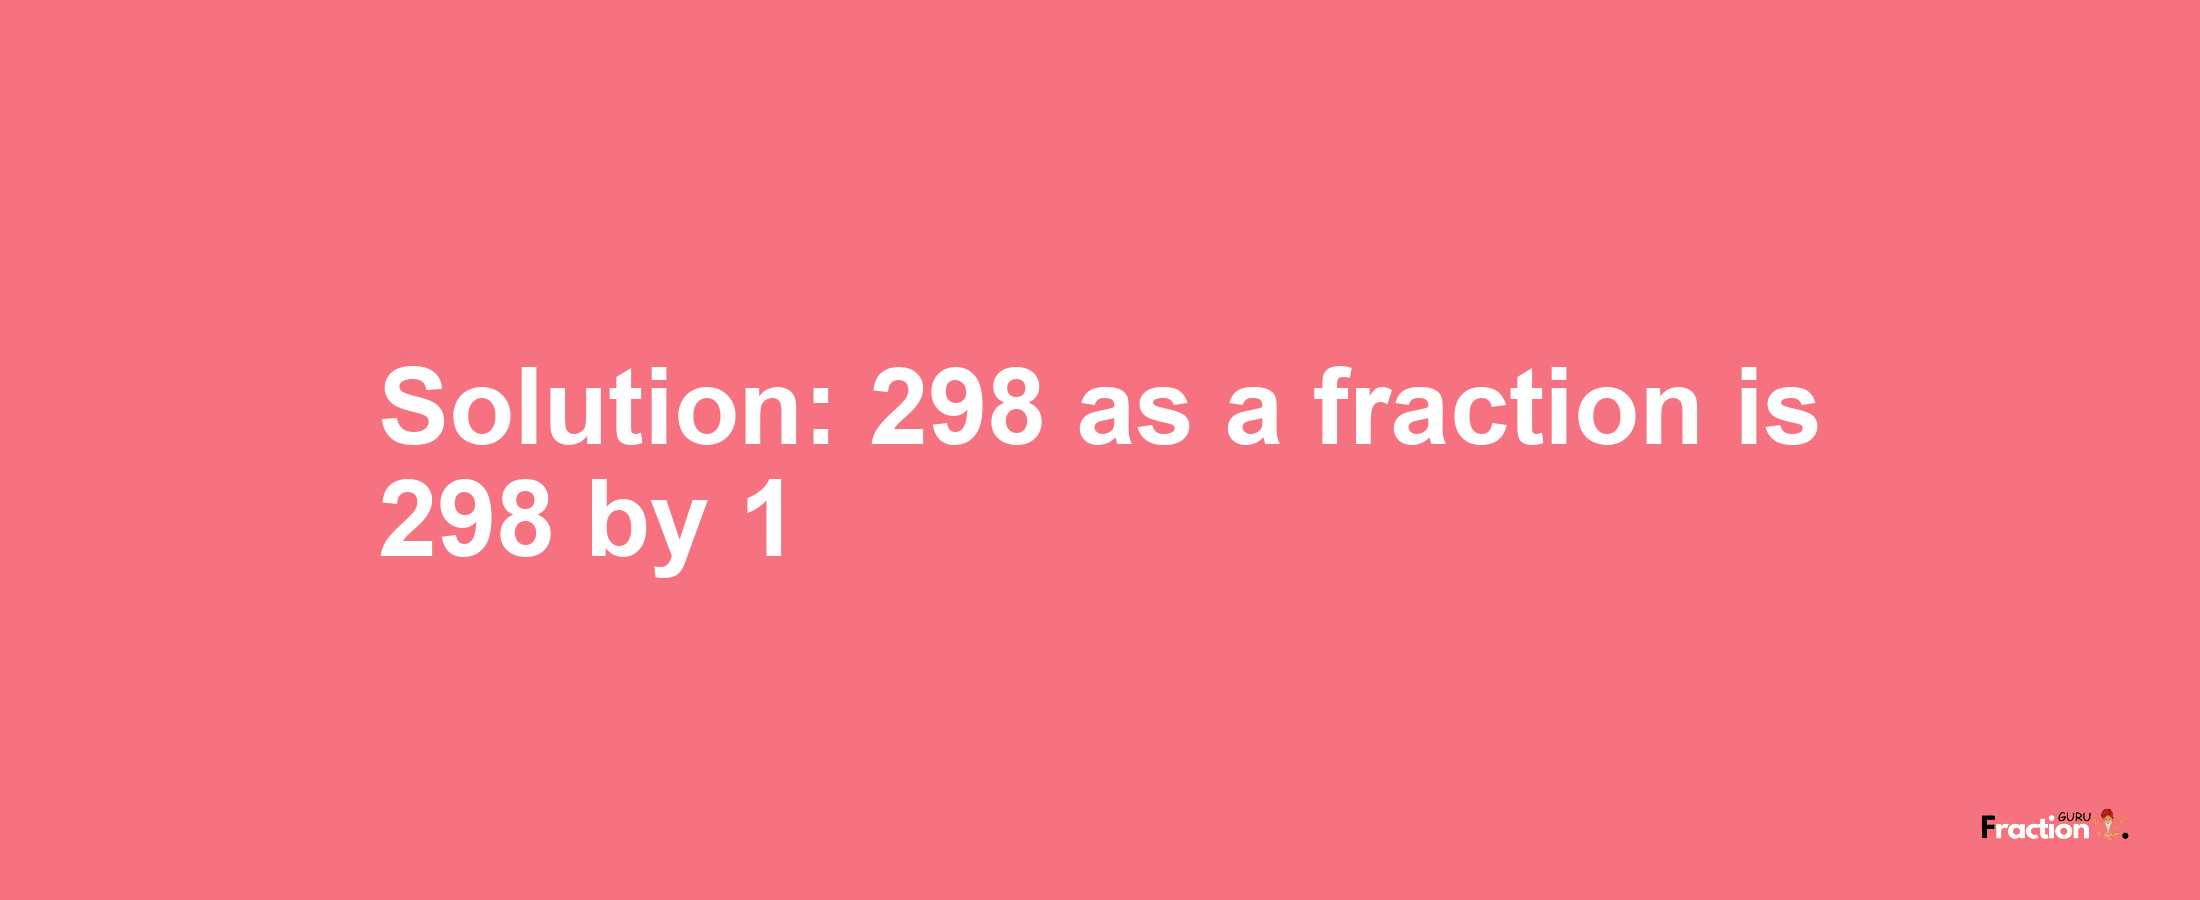 Solution:298 as a fraction is 298/1